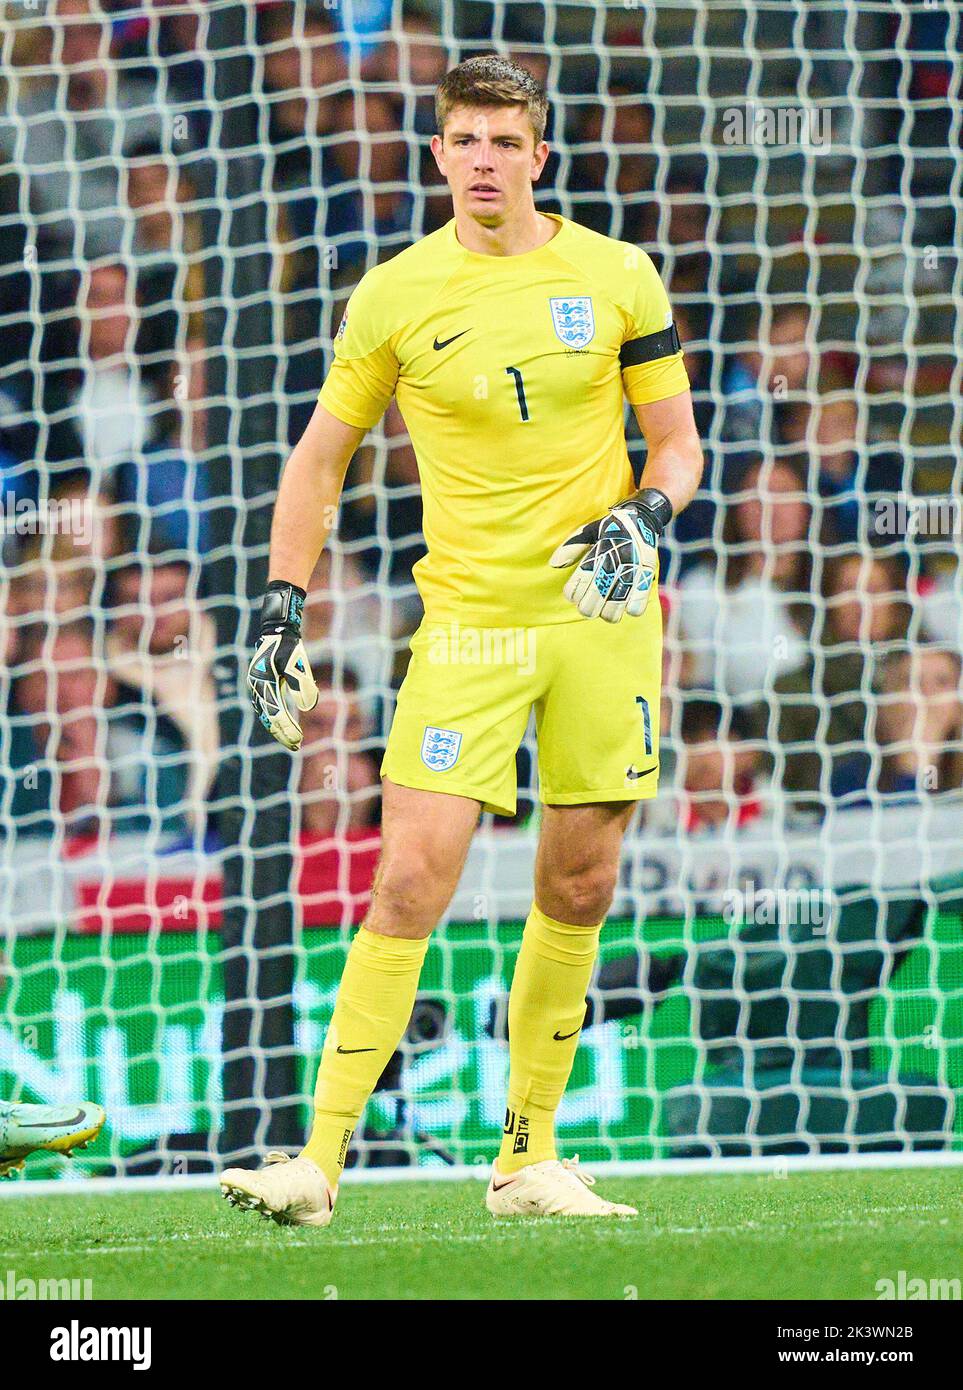 Nick Pope, England 1  in the UEFA Nations League 2022 match  ENGLAND - GERMANY 3-3  in Season 2022/2023 on Sept 26, 2022  in London, Great Britain.  © Peter Schatz / Alamy Live News Stock Photo